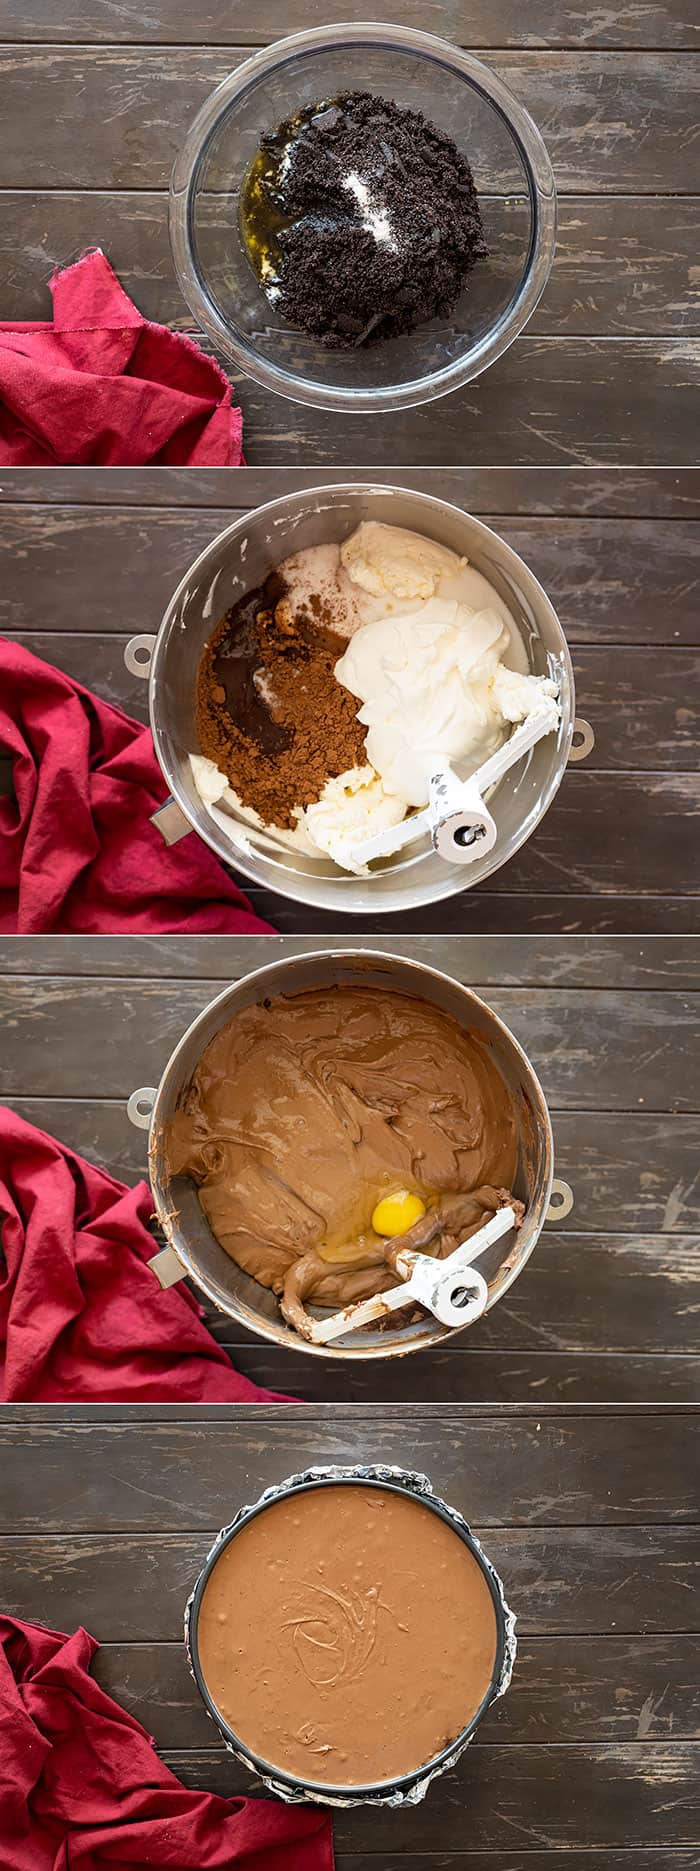 Four pictures showing how to make cheesecake: first the oreo crust, second mixing the batter, third adding the eggs, and last pouring into the pan. 